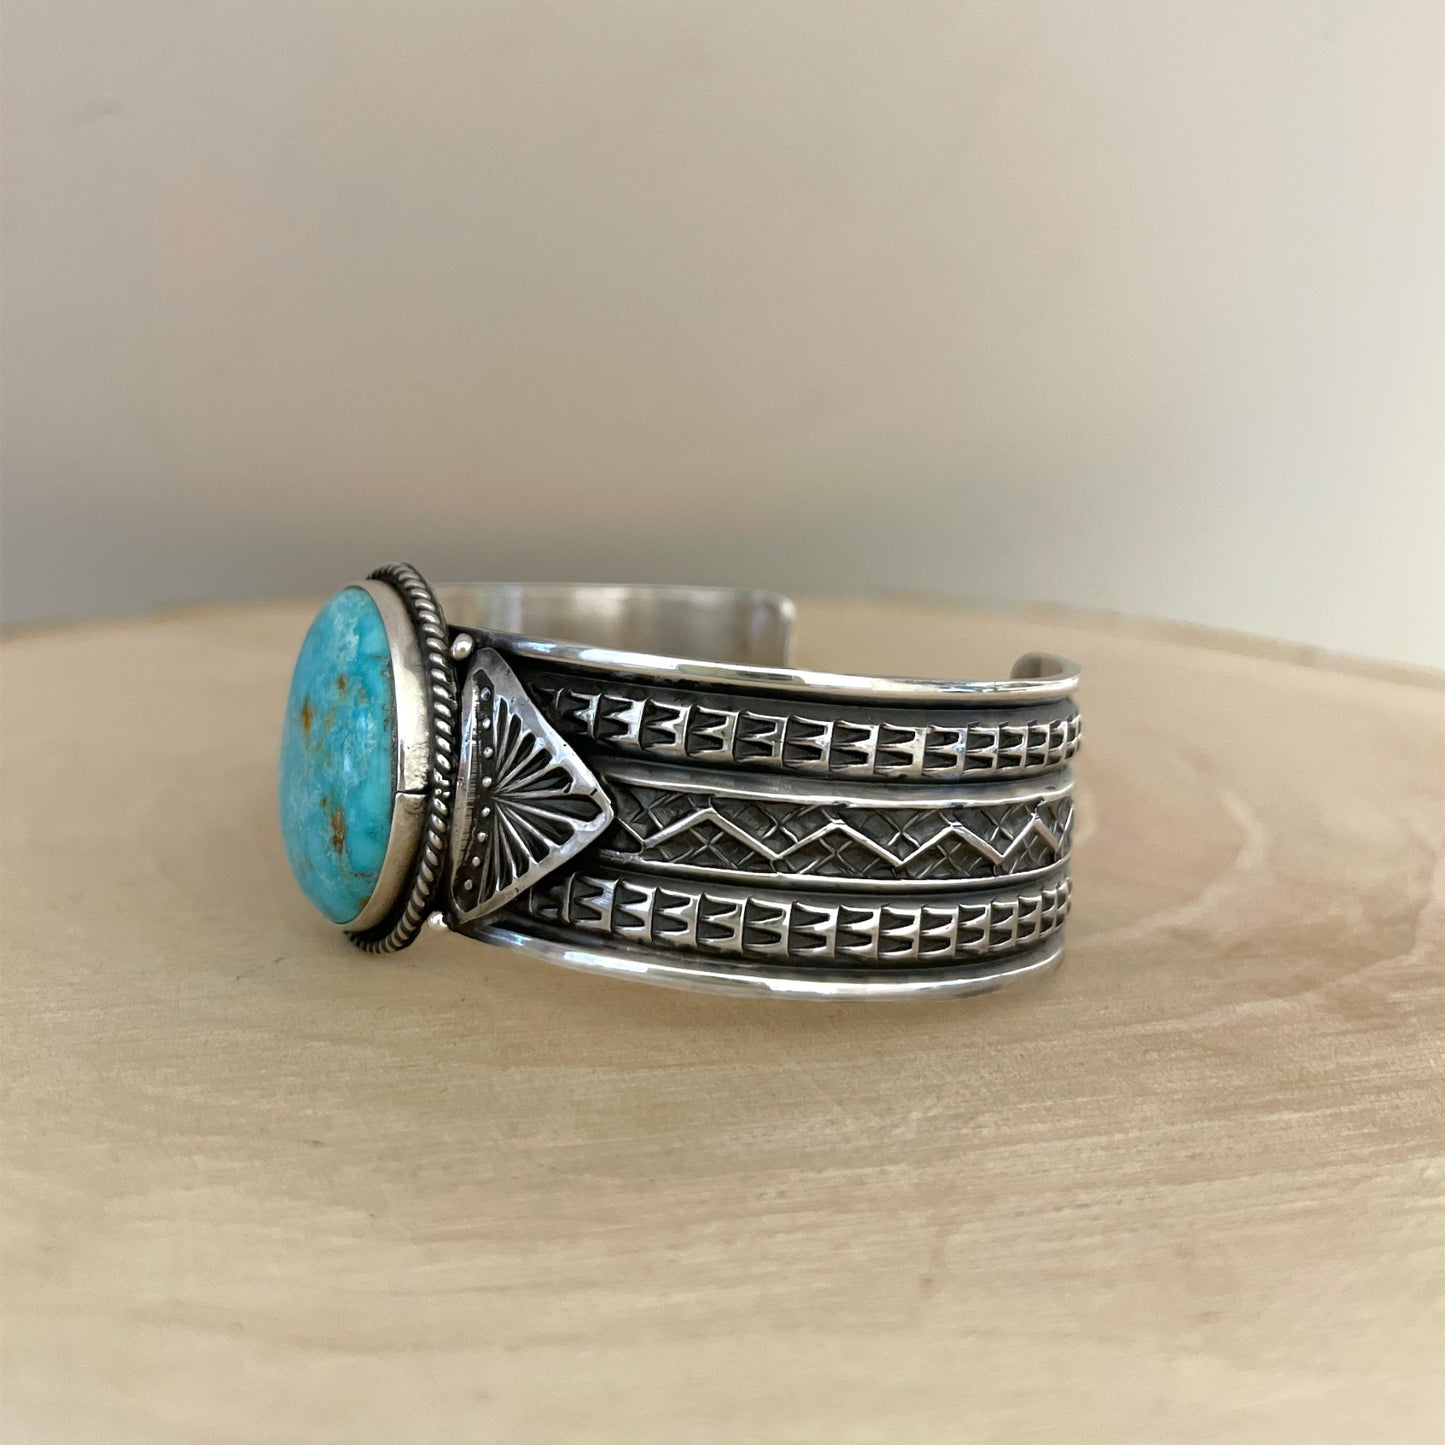 Stamped Kingman Turquoise Cuff Bracelet By Sunshine Reeves 5.4"